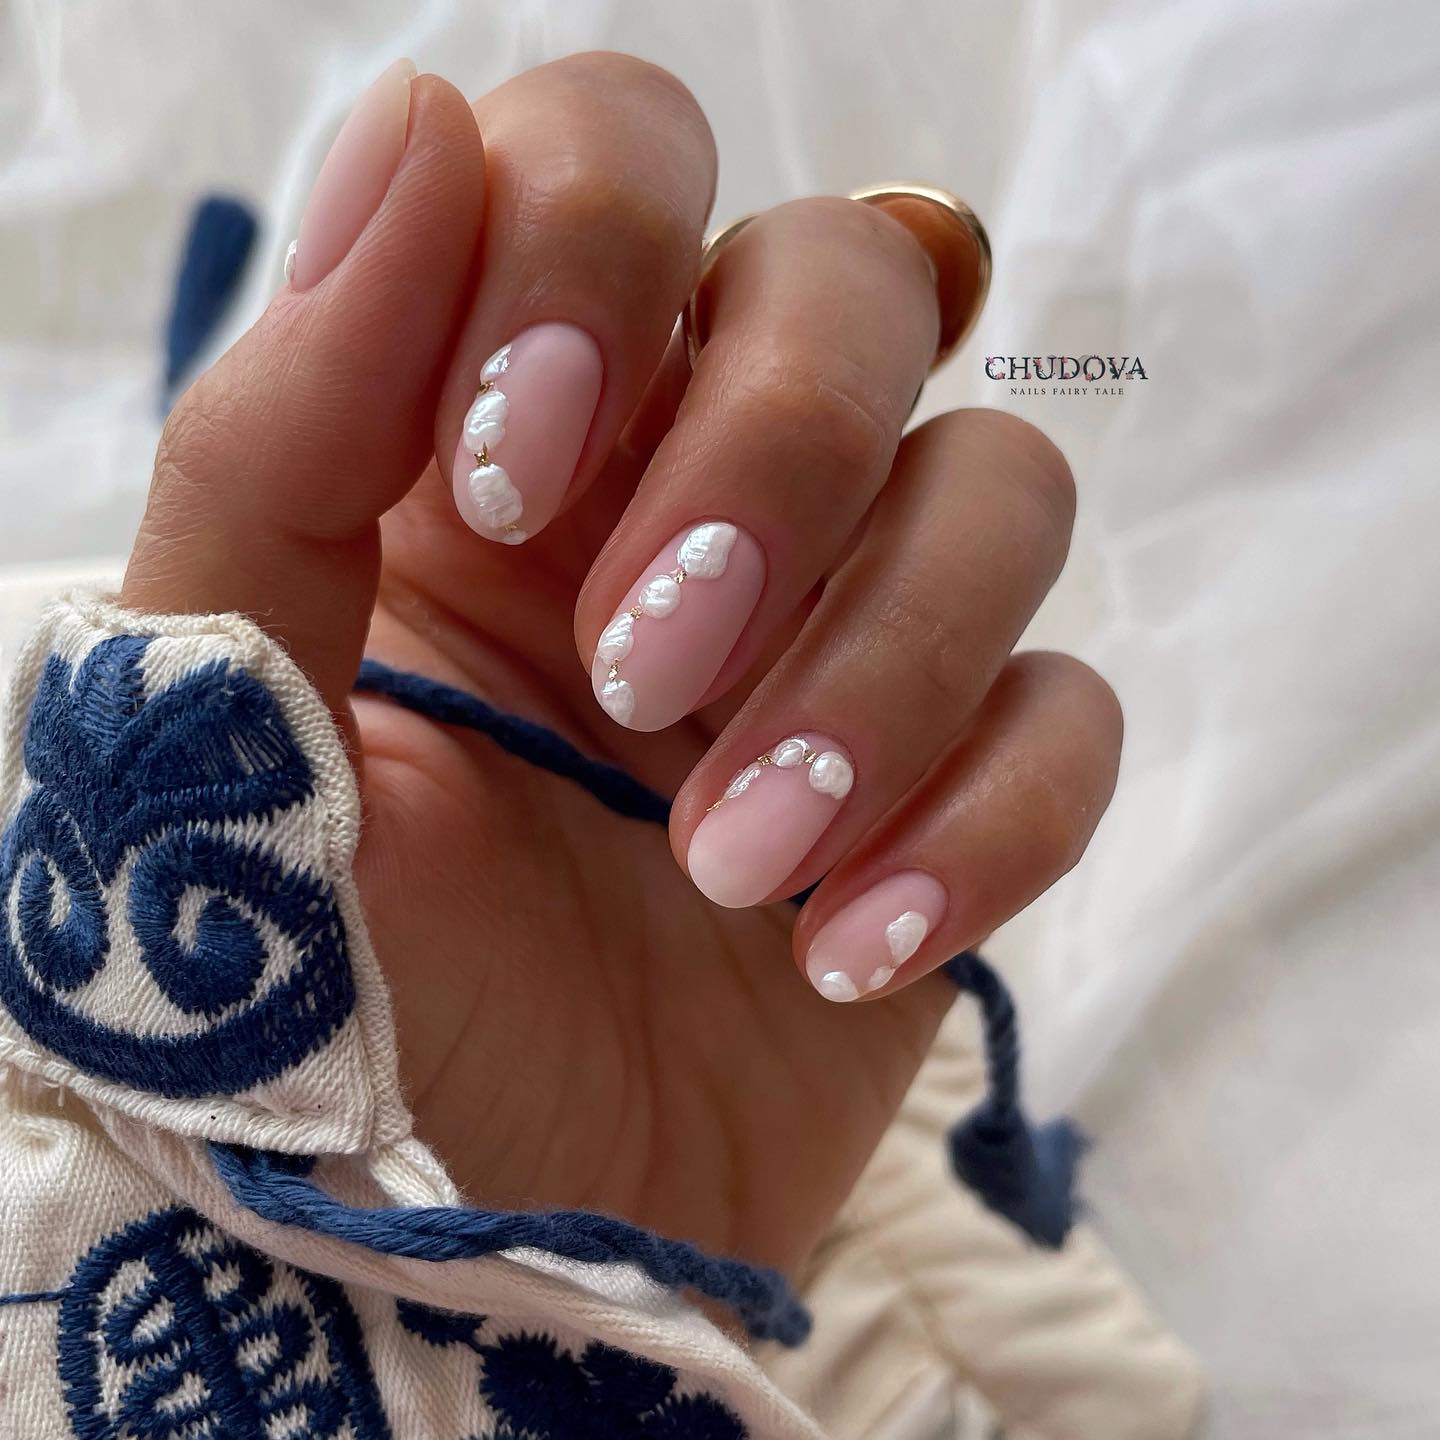 Short Oval Nude Nails with White Dots